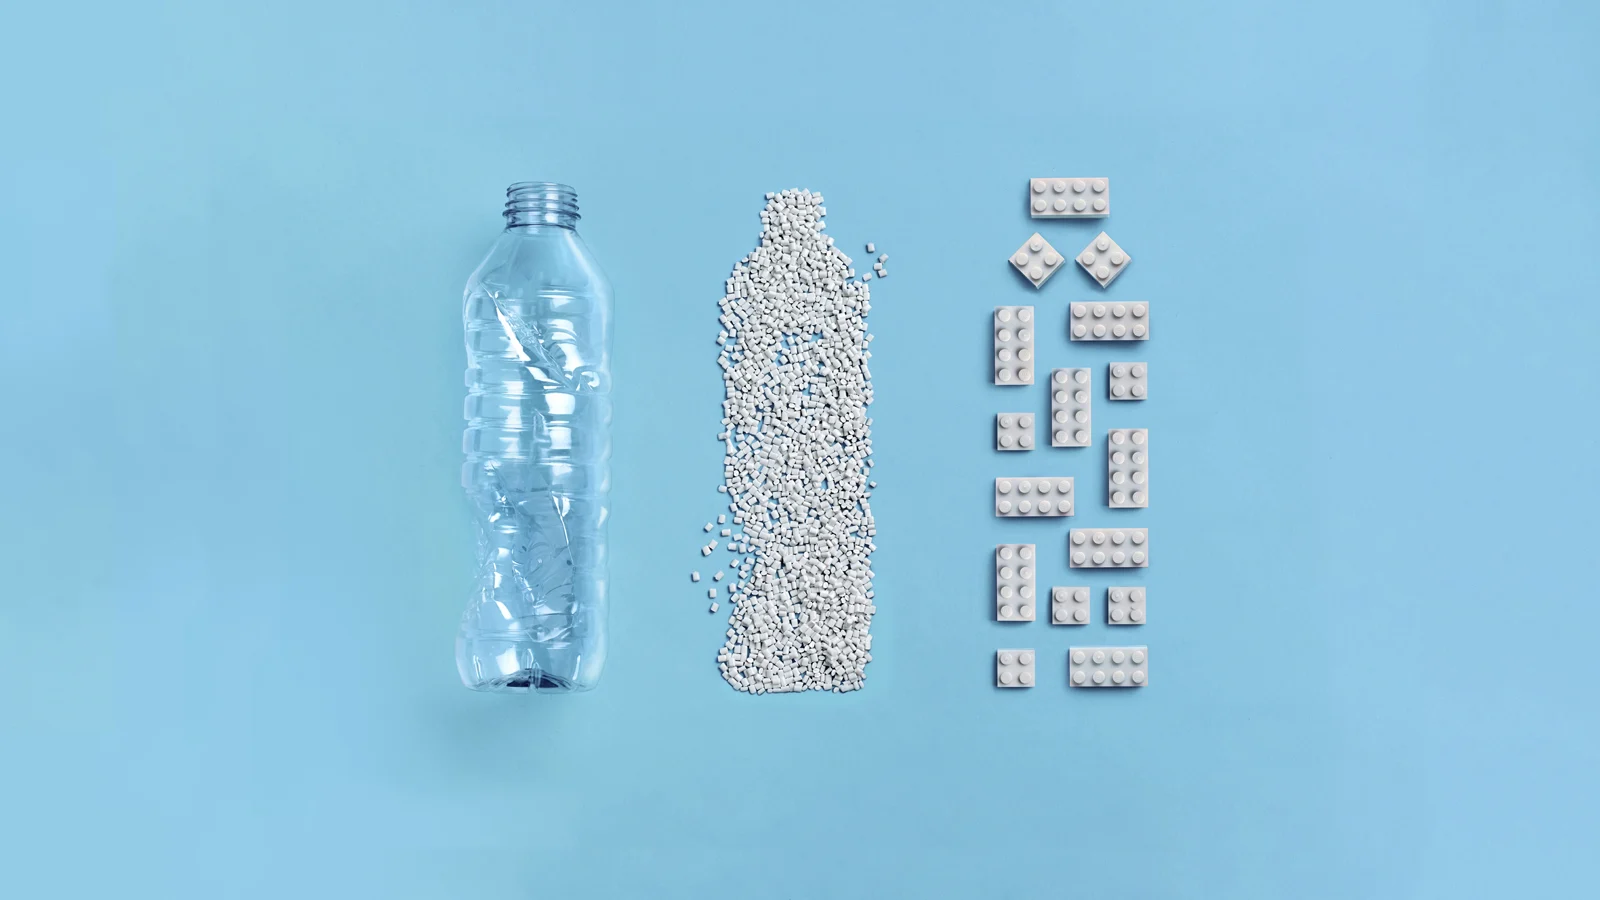 LEGO's new prototype bricks are made from recycled plastic bottles. 